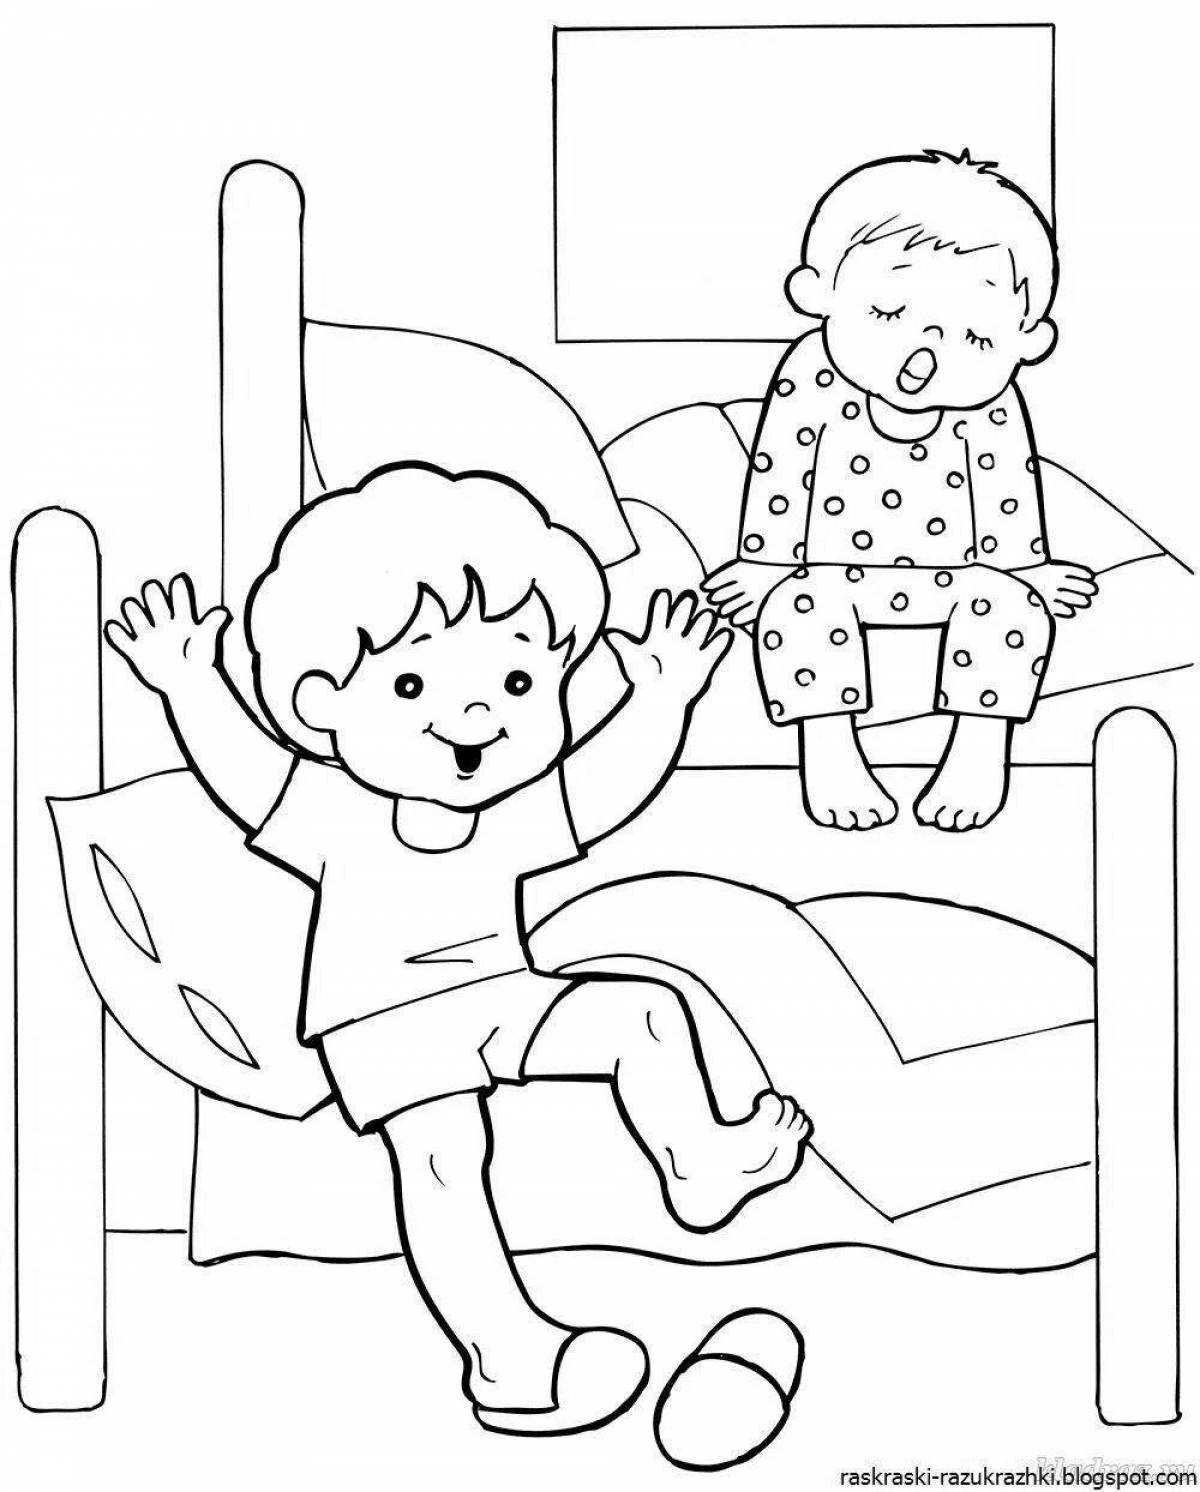 Glowing morning coloring page for kids